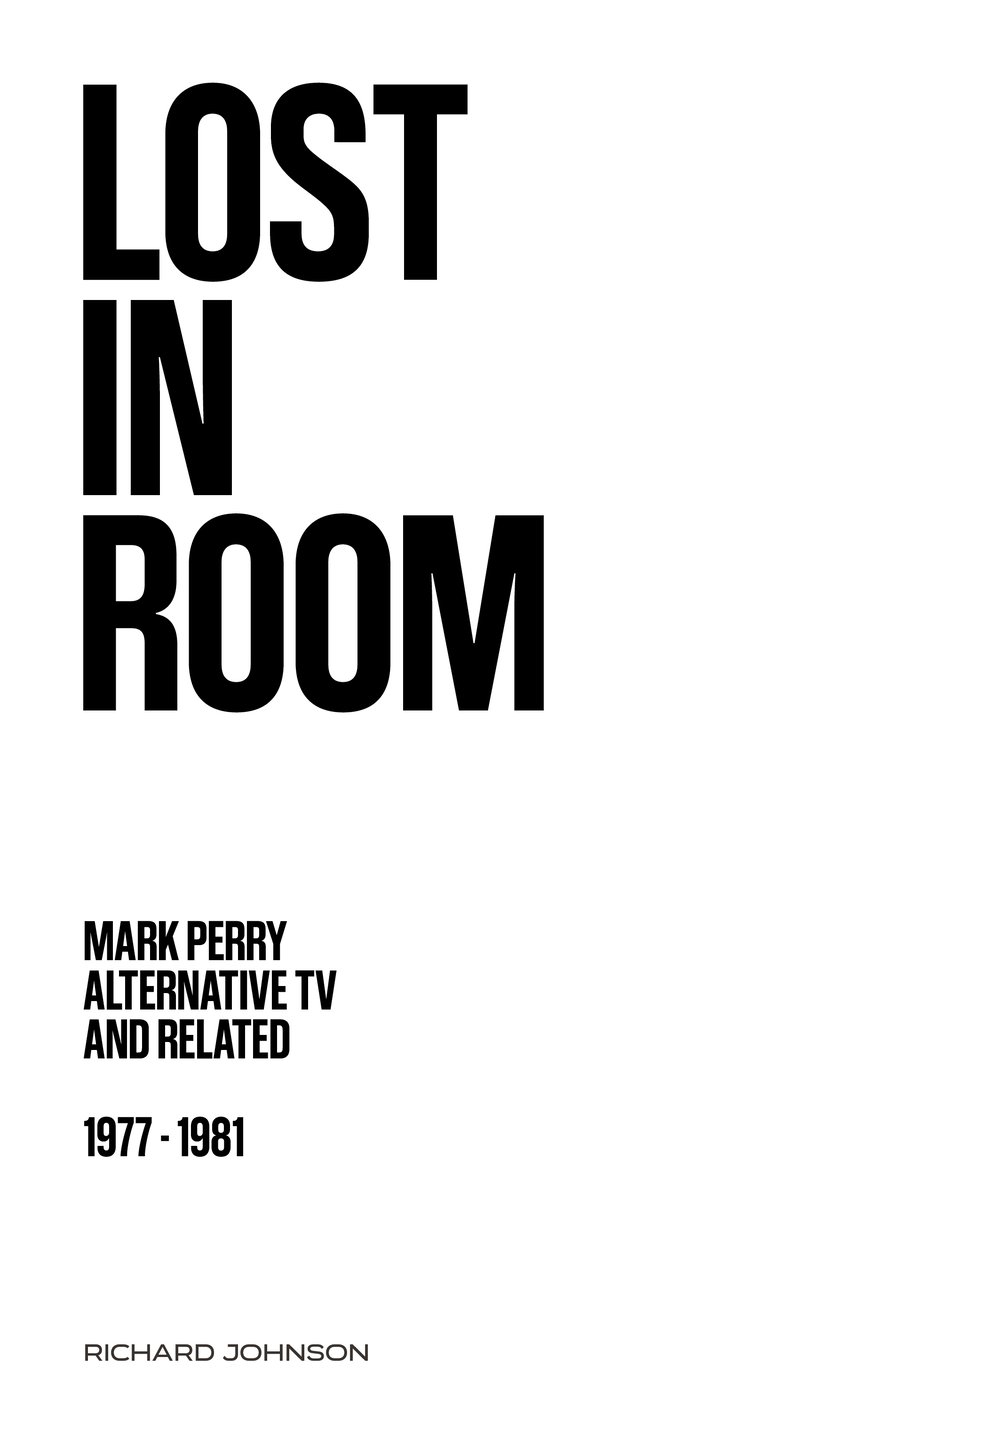 Image of Lost in Room: Mark Perry, Alternative TV and Related, 1977 - 1981 book  hardback 